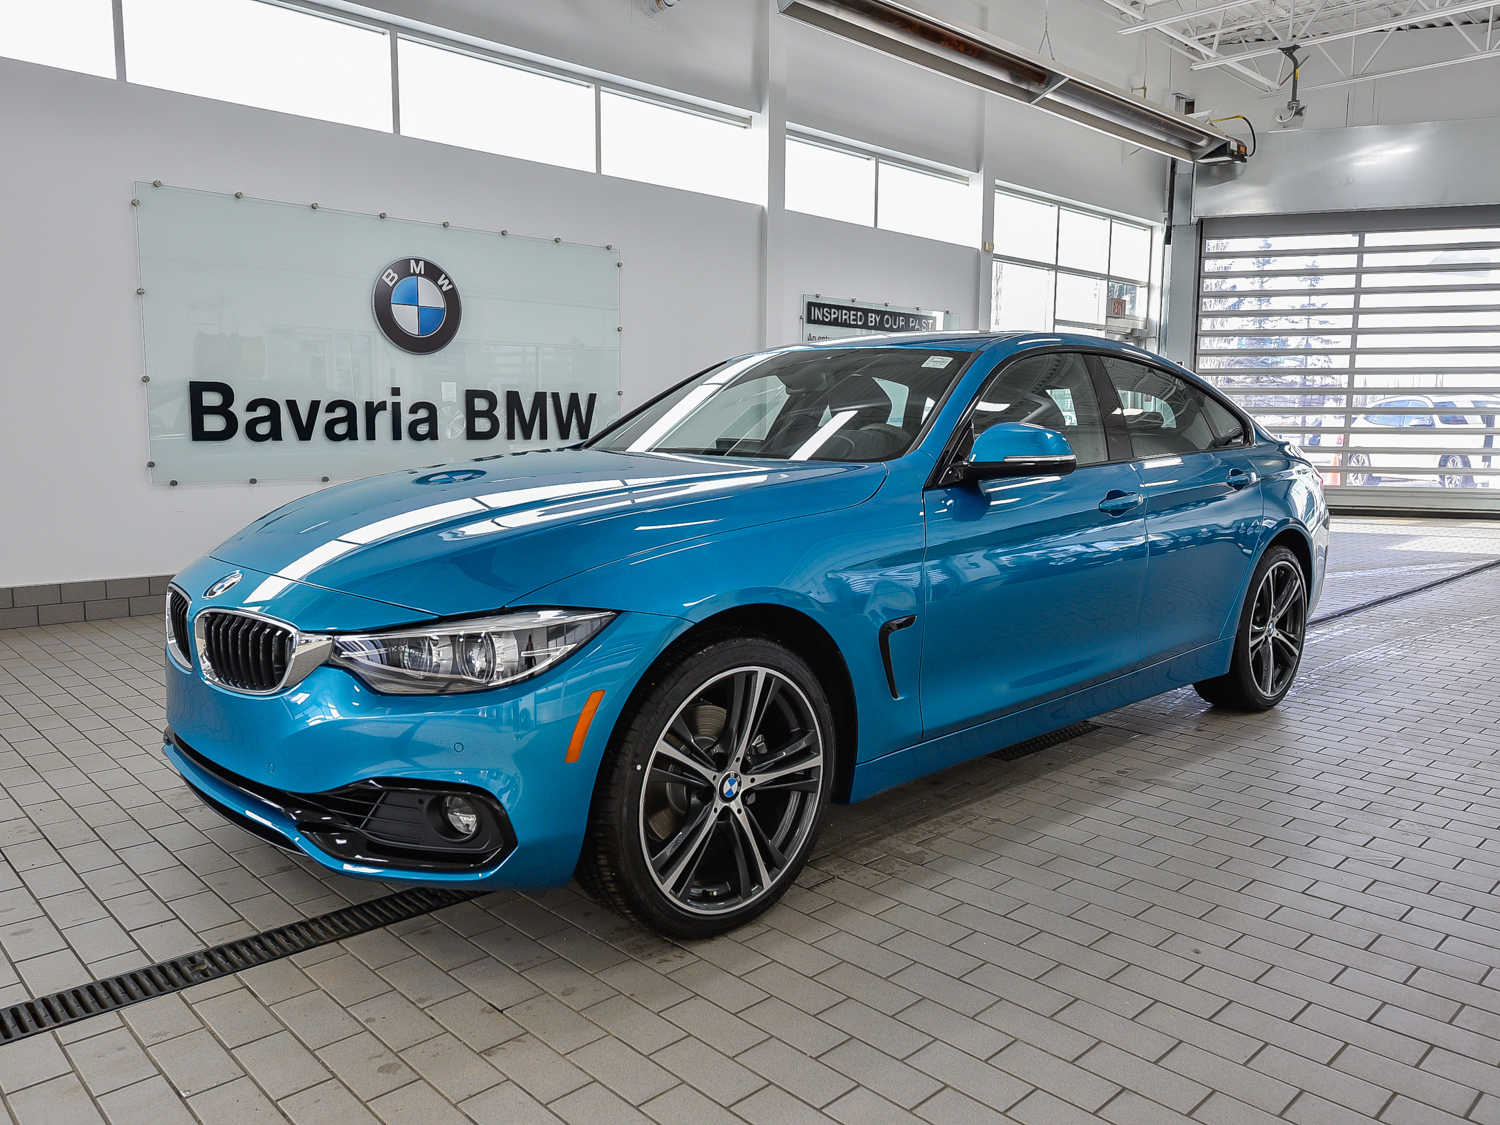 New 2018 BMW 430i xDrive Gran Coupe Coupe in Edmonton #184G4072